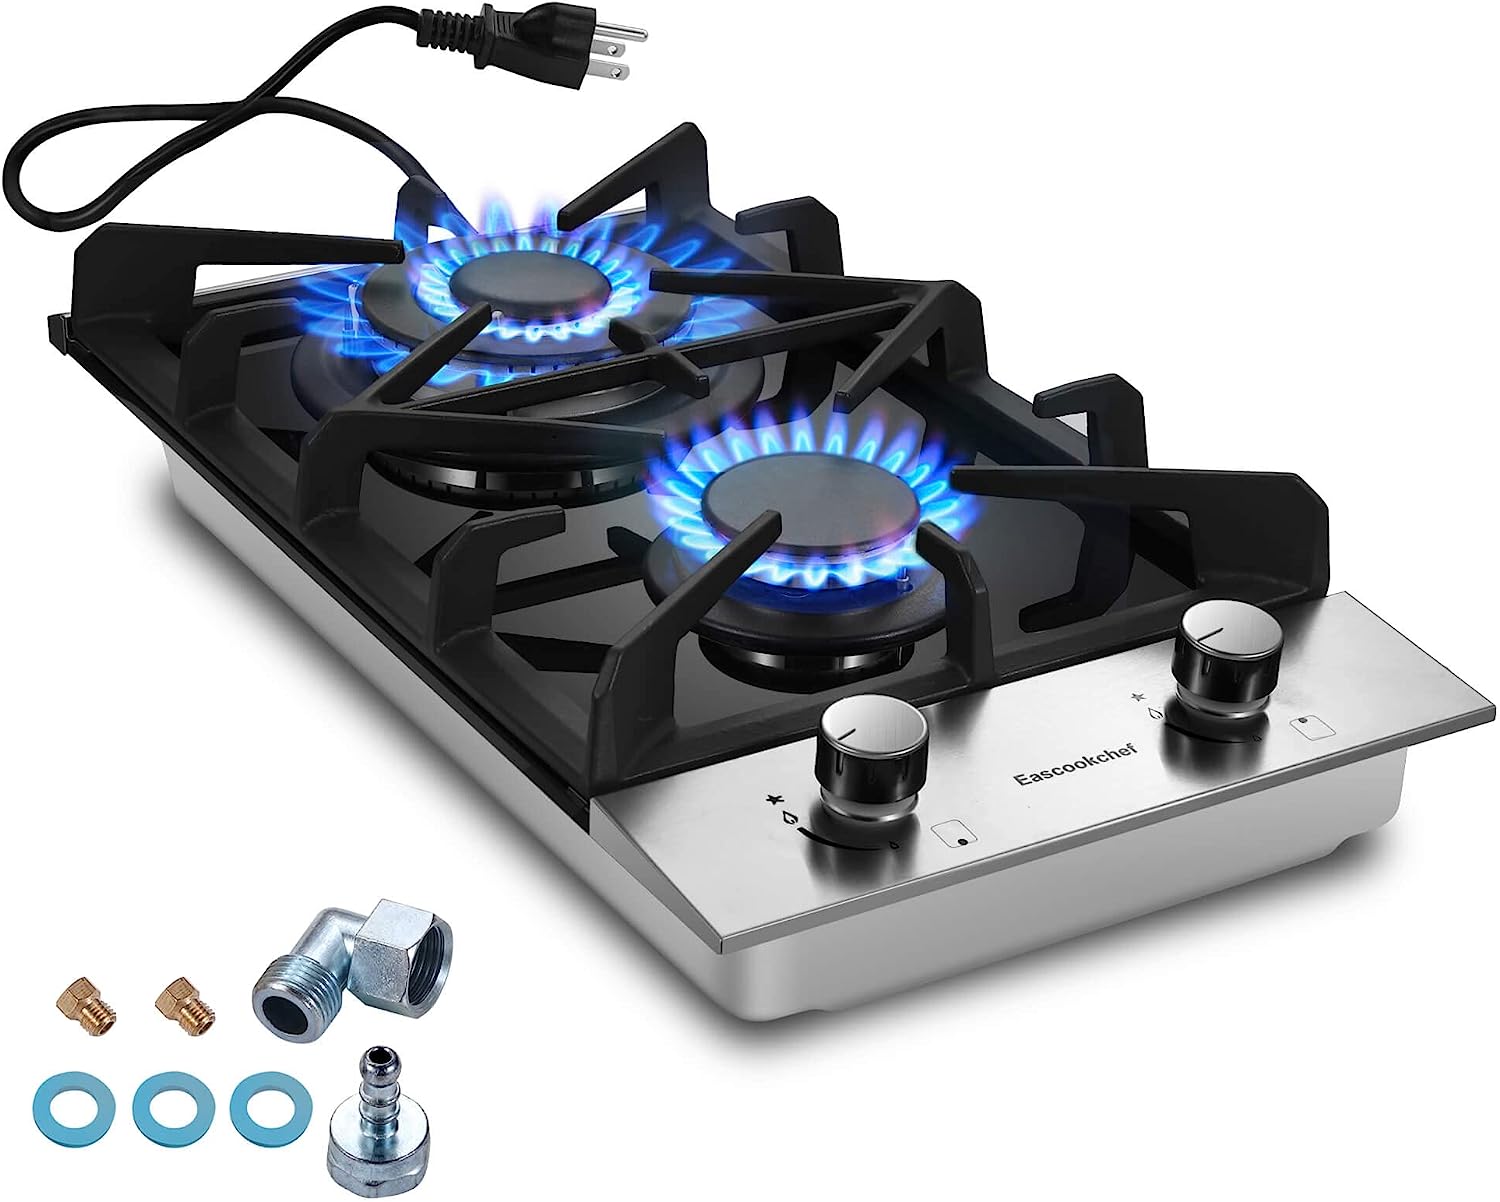 Eascookchef 2 Burner Propane Gas Cooktop, 12 inch [...]